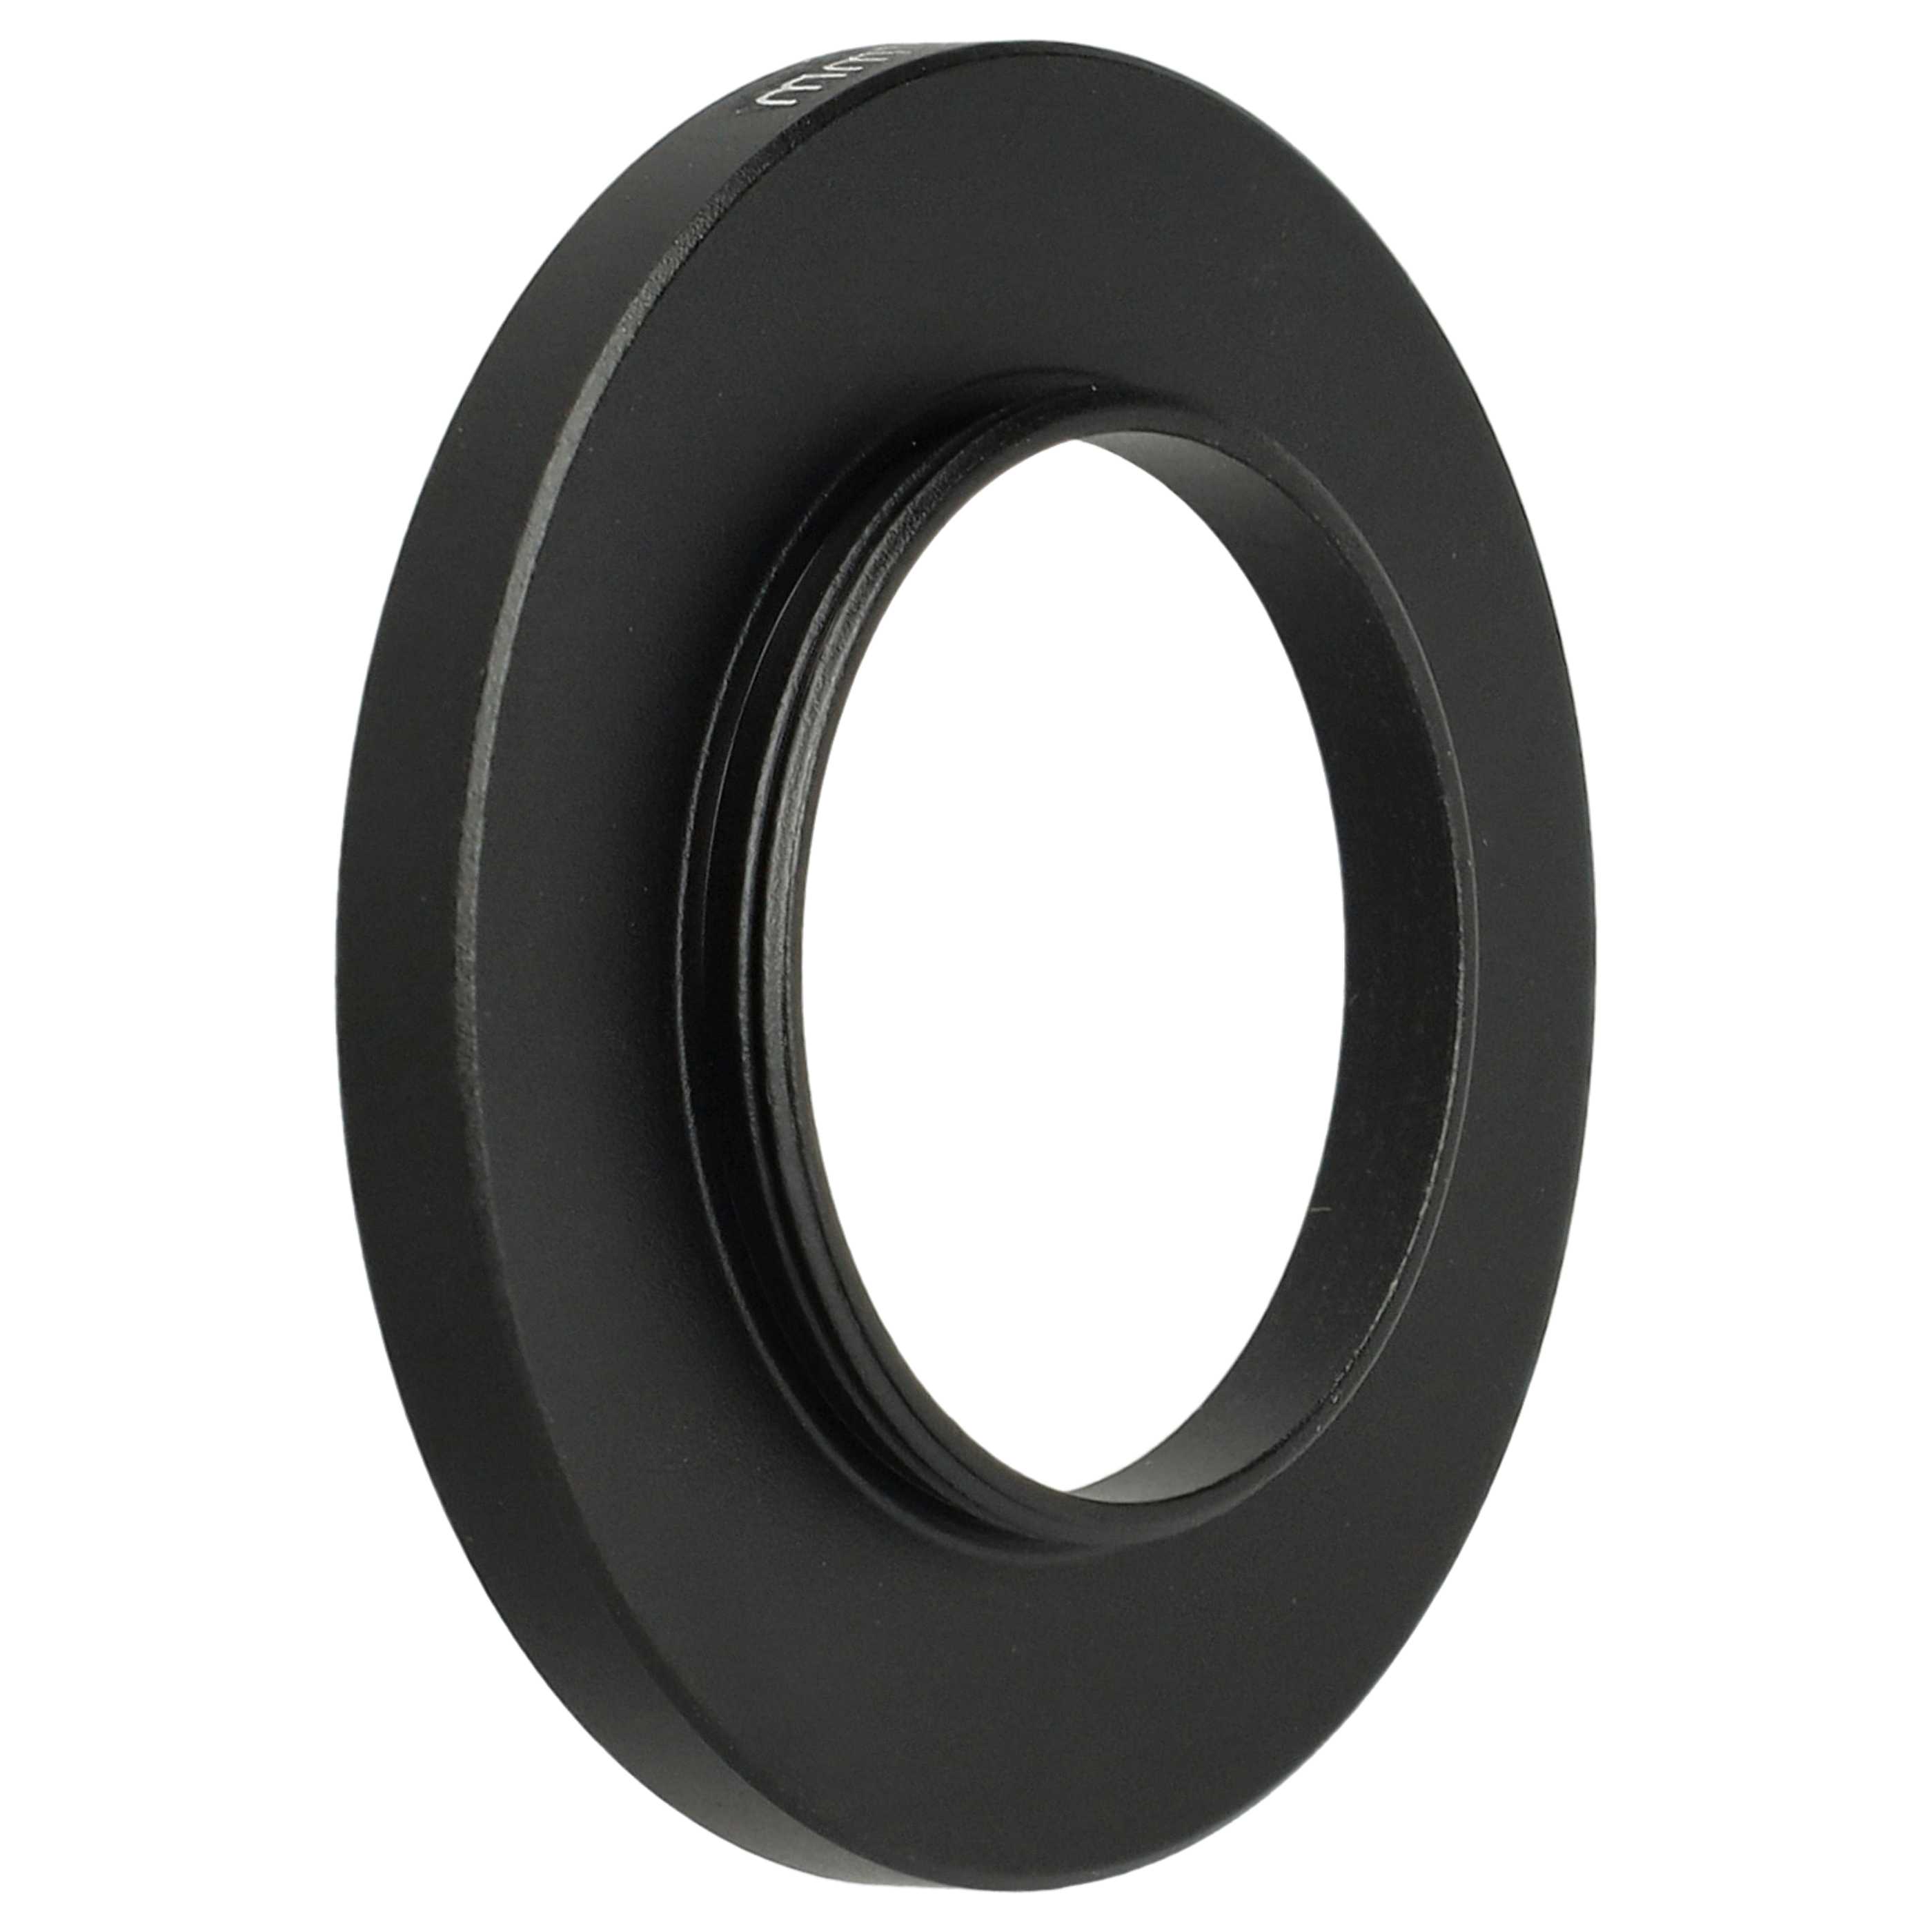 Step-Up Ring Adapter of 25 mm to 37 mmfor various Camera Lens - Filter Adapter